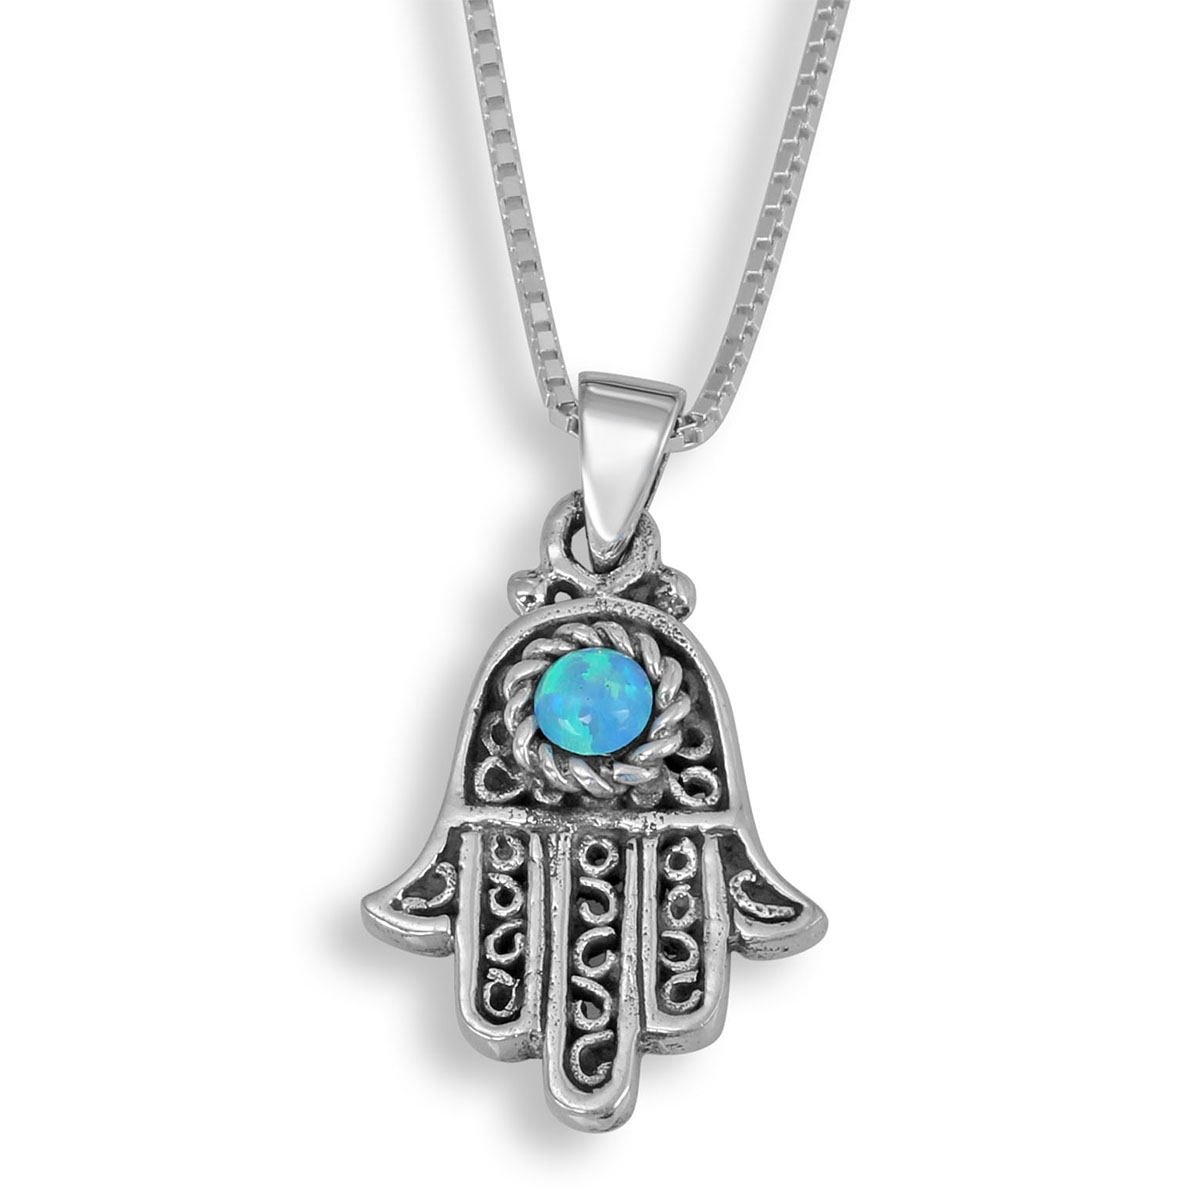 Filigree Hamsa Sterling Silver Necklace with Blue Opal - 1